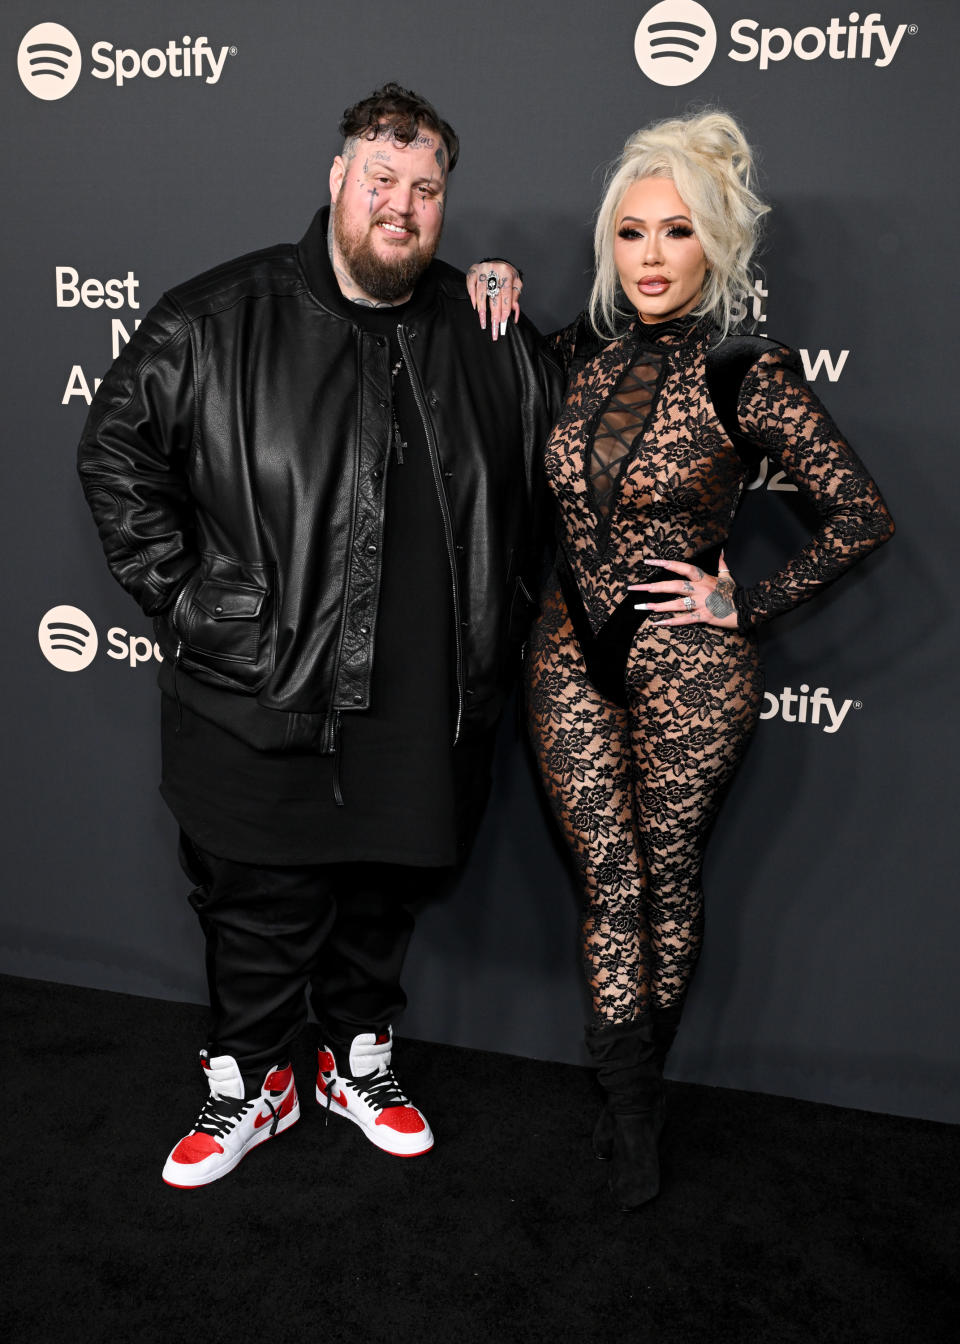 Jelly Roll and Bunnie XO at the Spotify Best New Artist Party held at Paramount Studios on February 1, 2024 in Los Angeles, California.